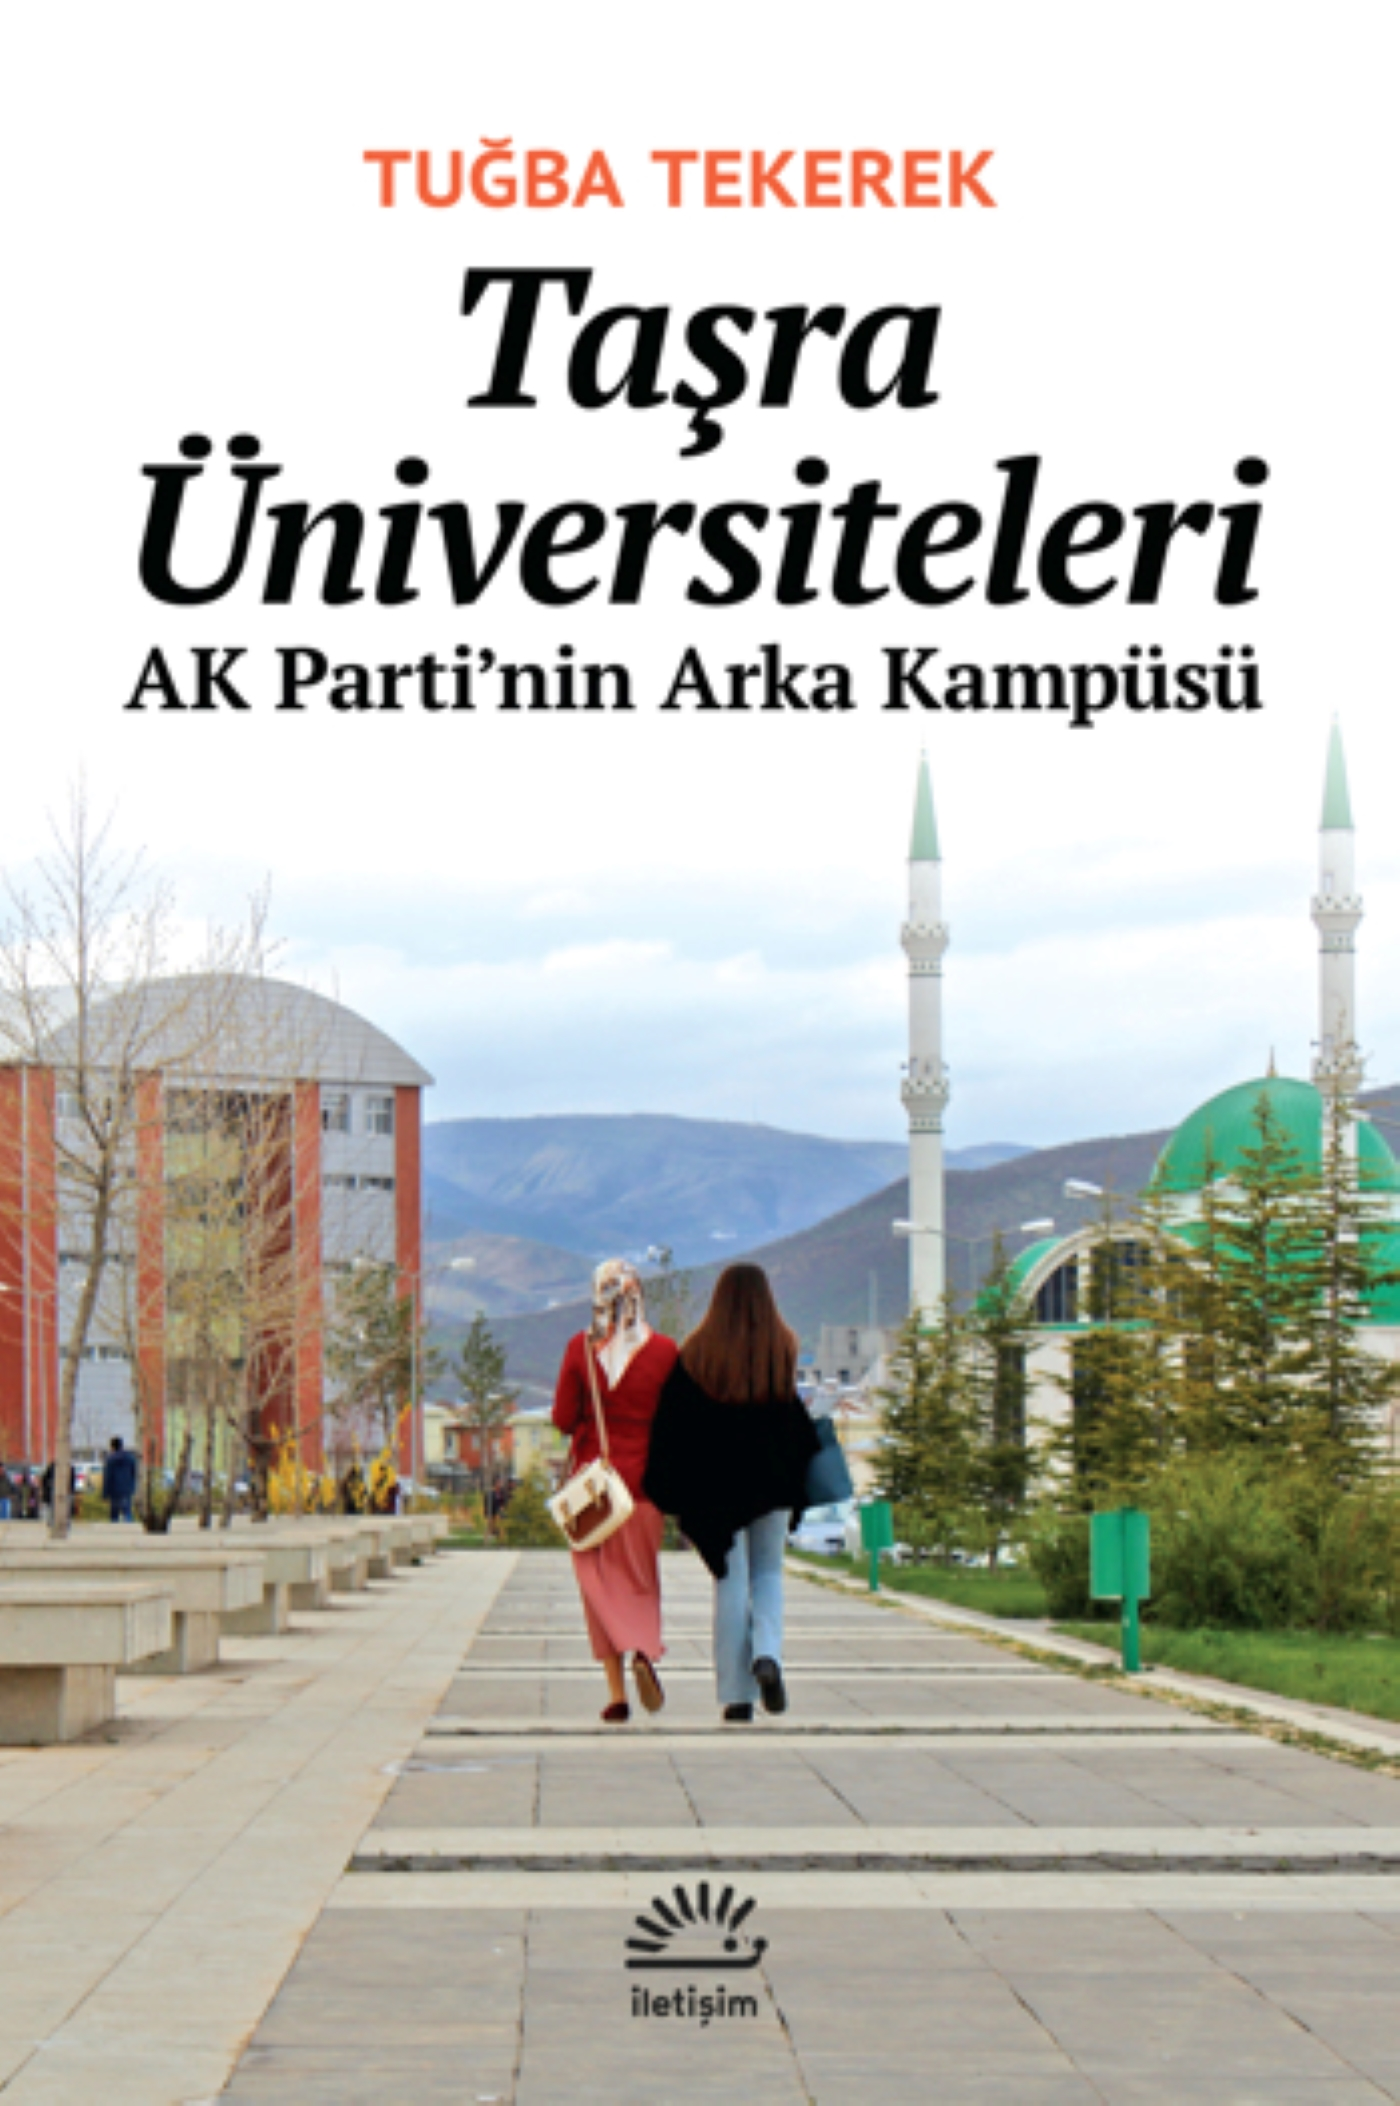 Provincial Universities: The AK Party’s Backyard Campus